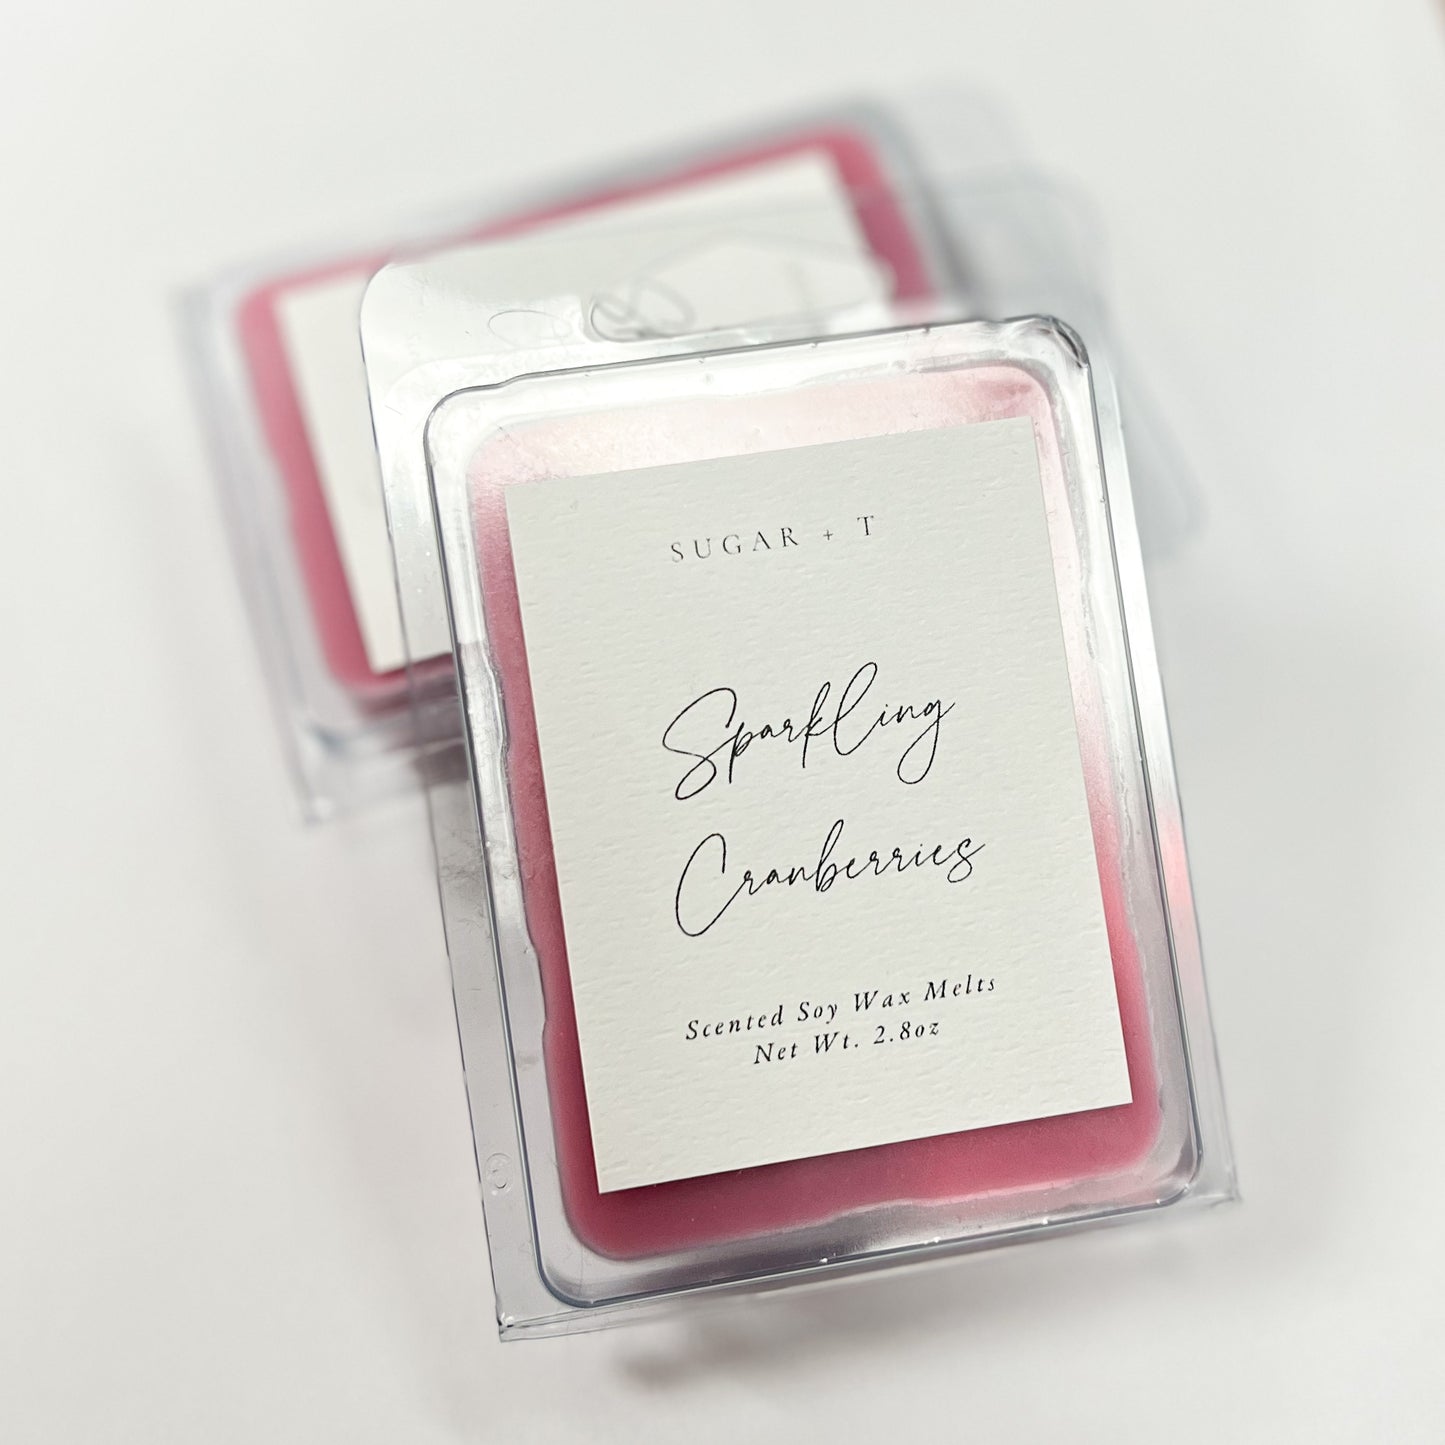 Sparkling Cranberries Scented Wax Melts